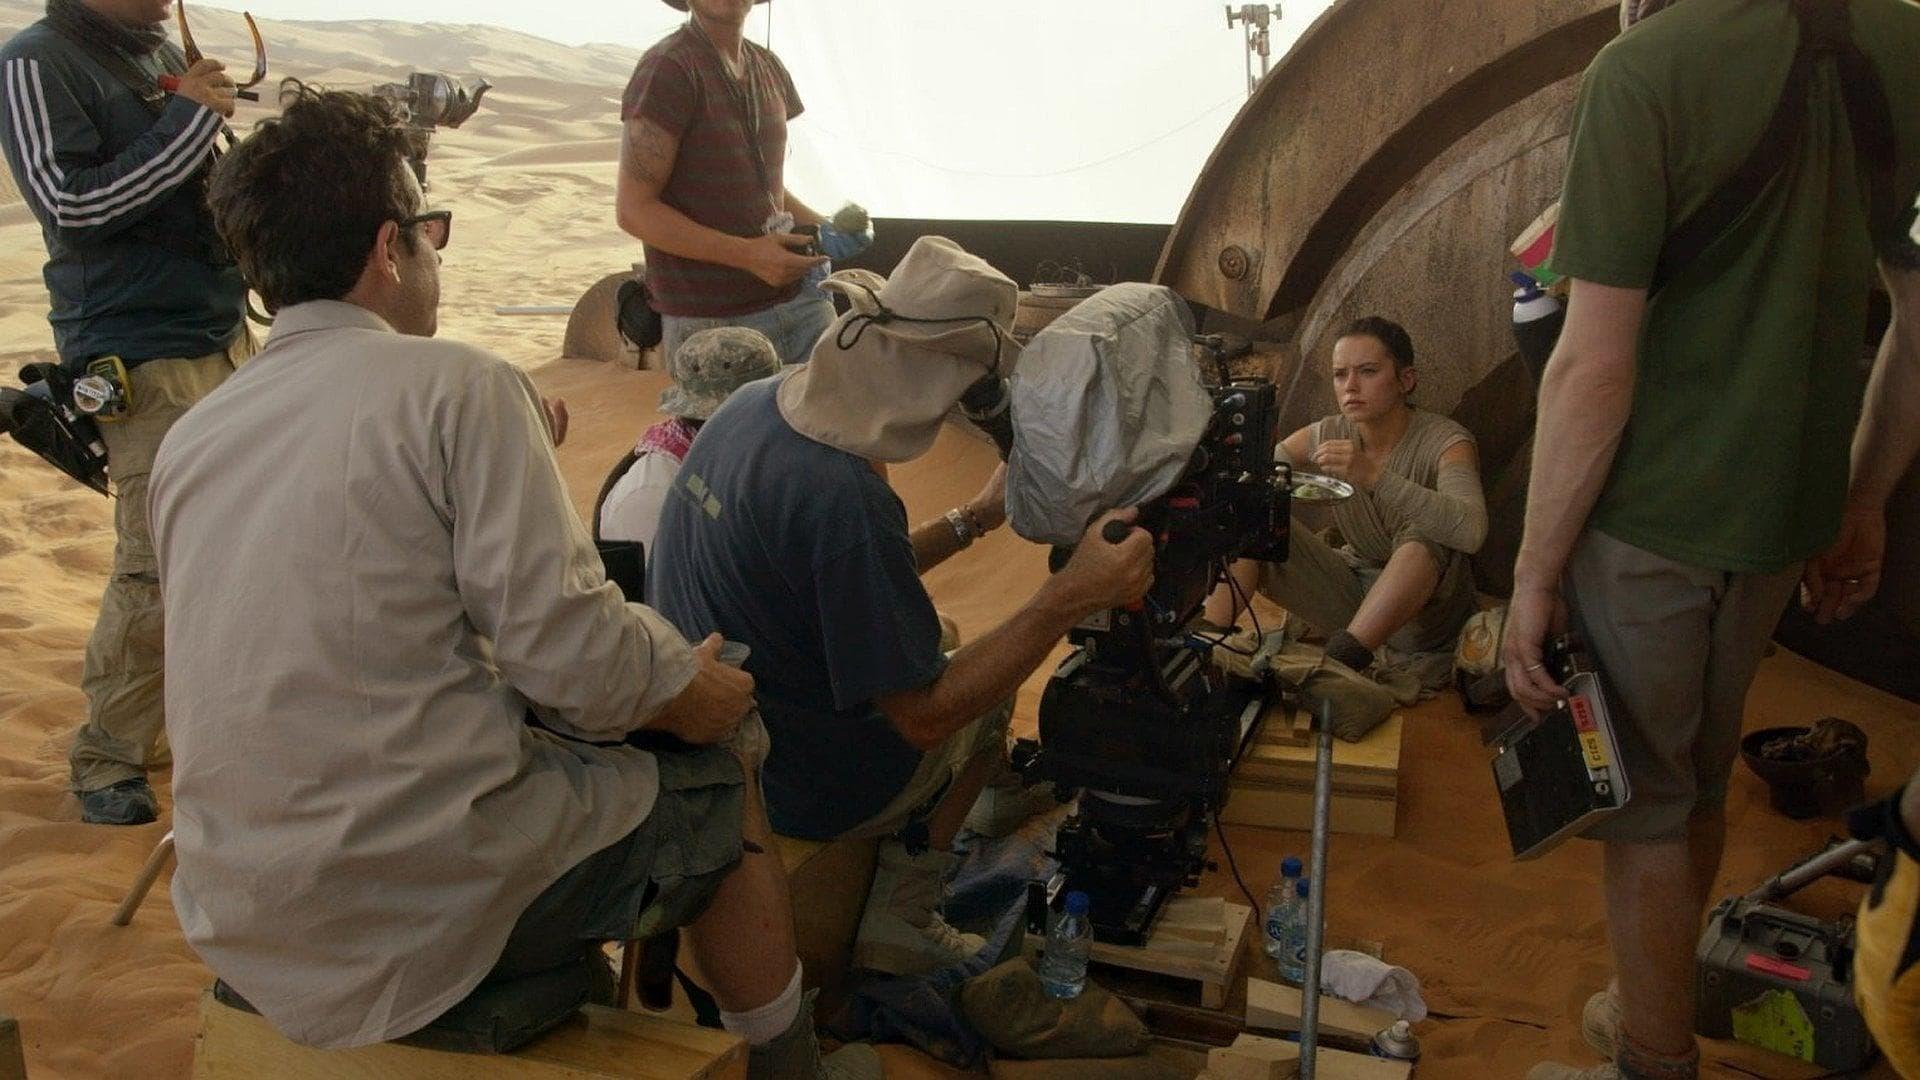 Secrets of the Force Awakens: A Cinematic Journey backdrop